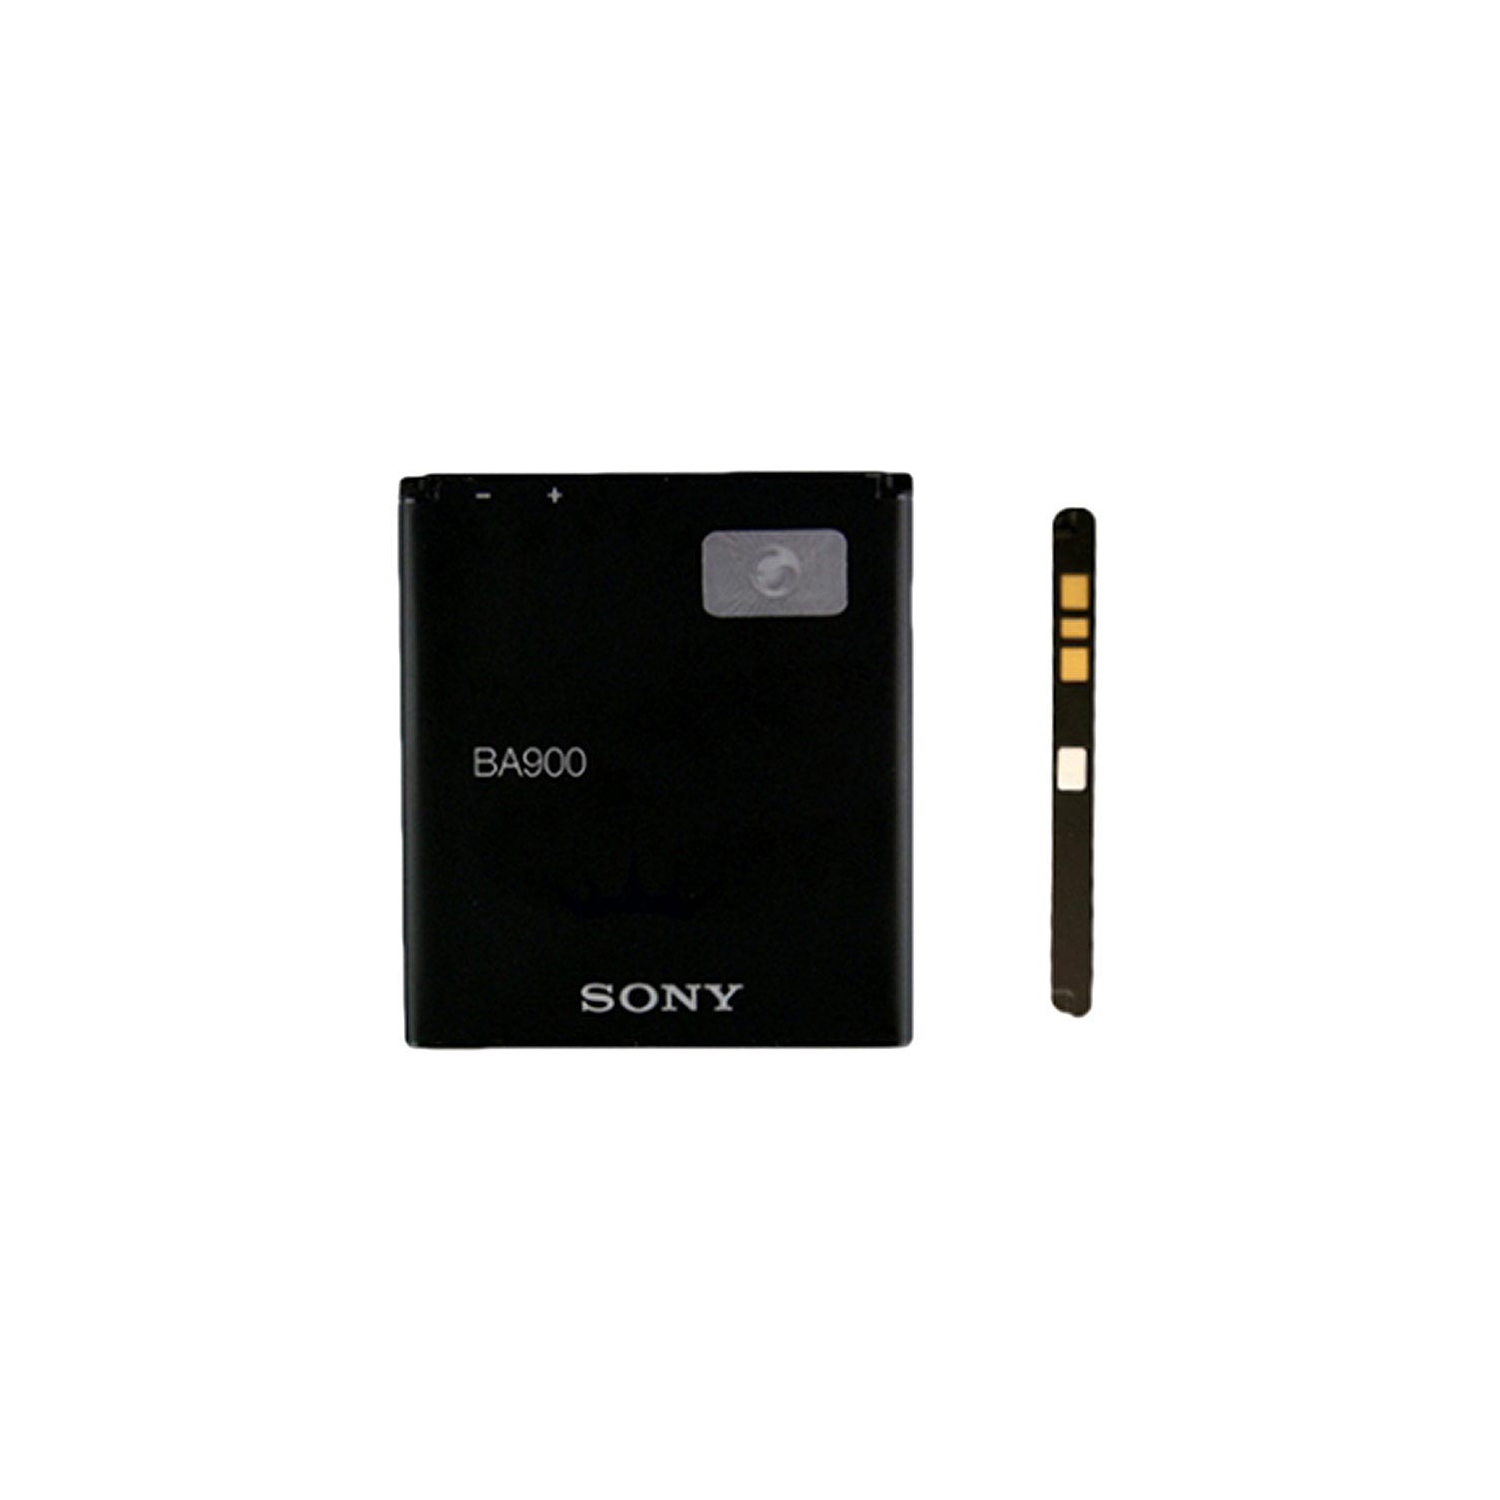 Replacement Battery for Sony Xperia J /ST26 / TX GX / LT29i / L/ C2104/M, BA900